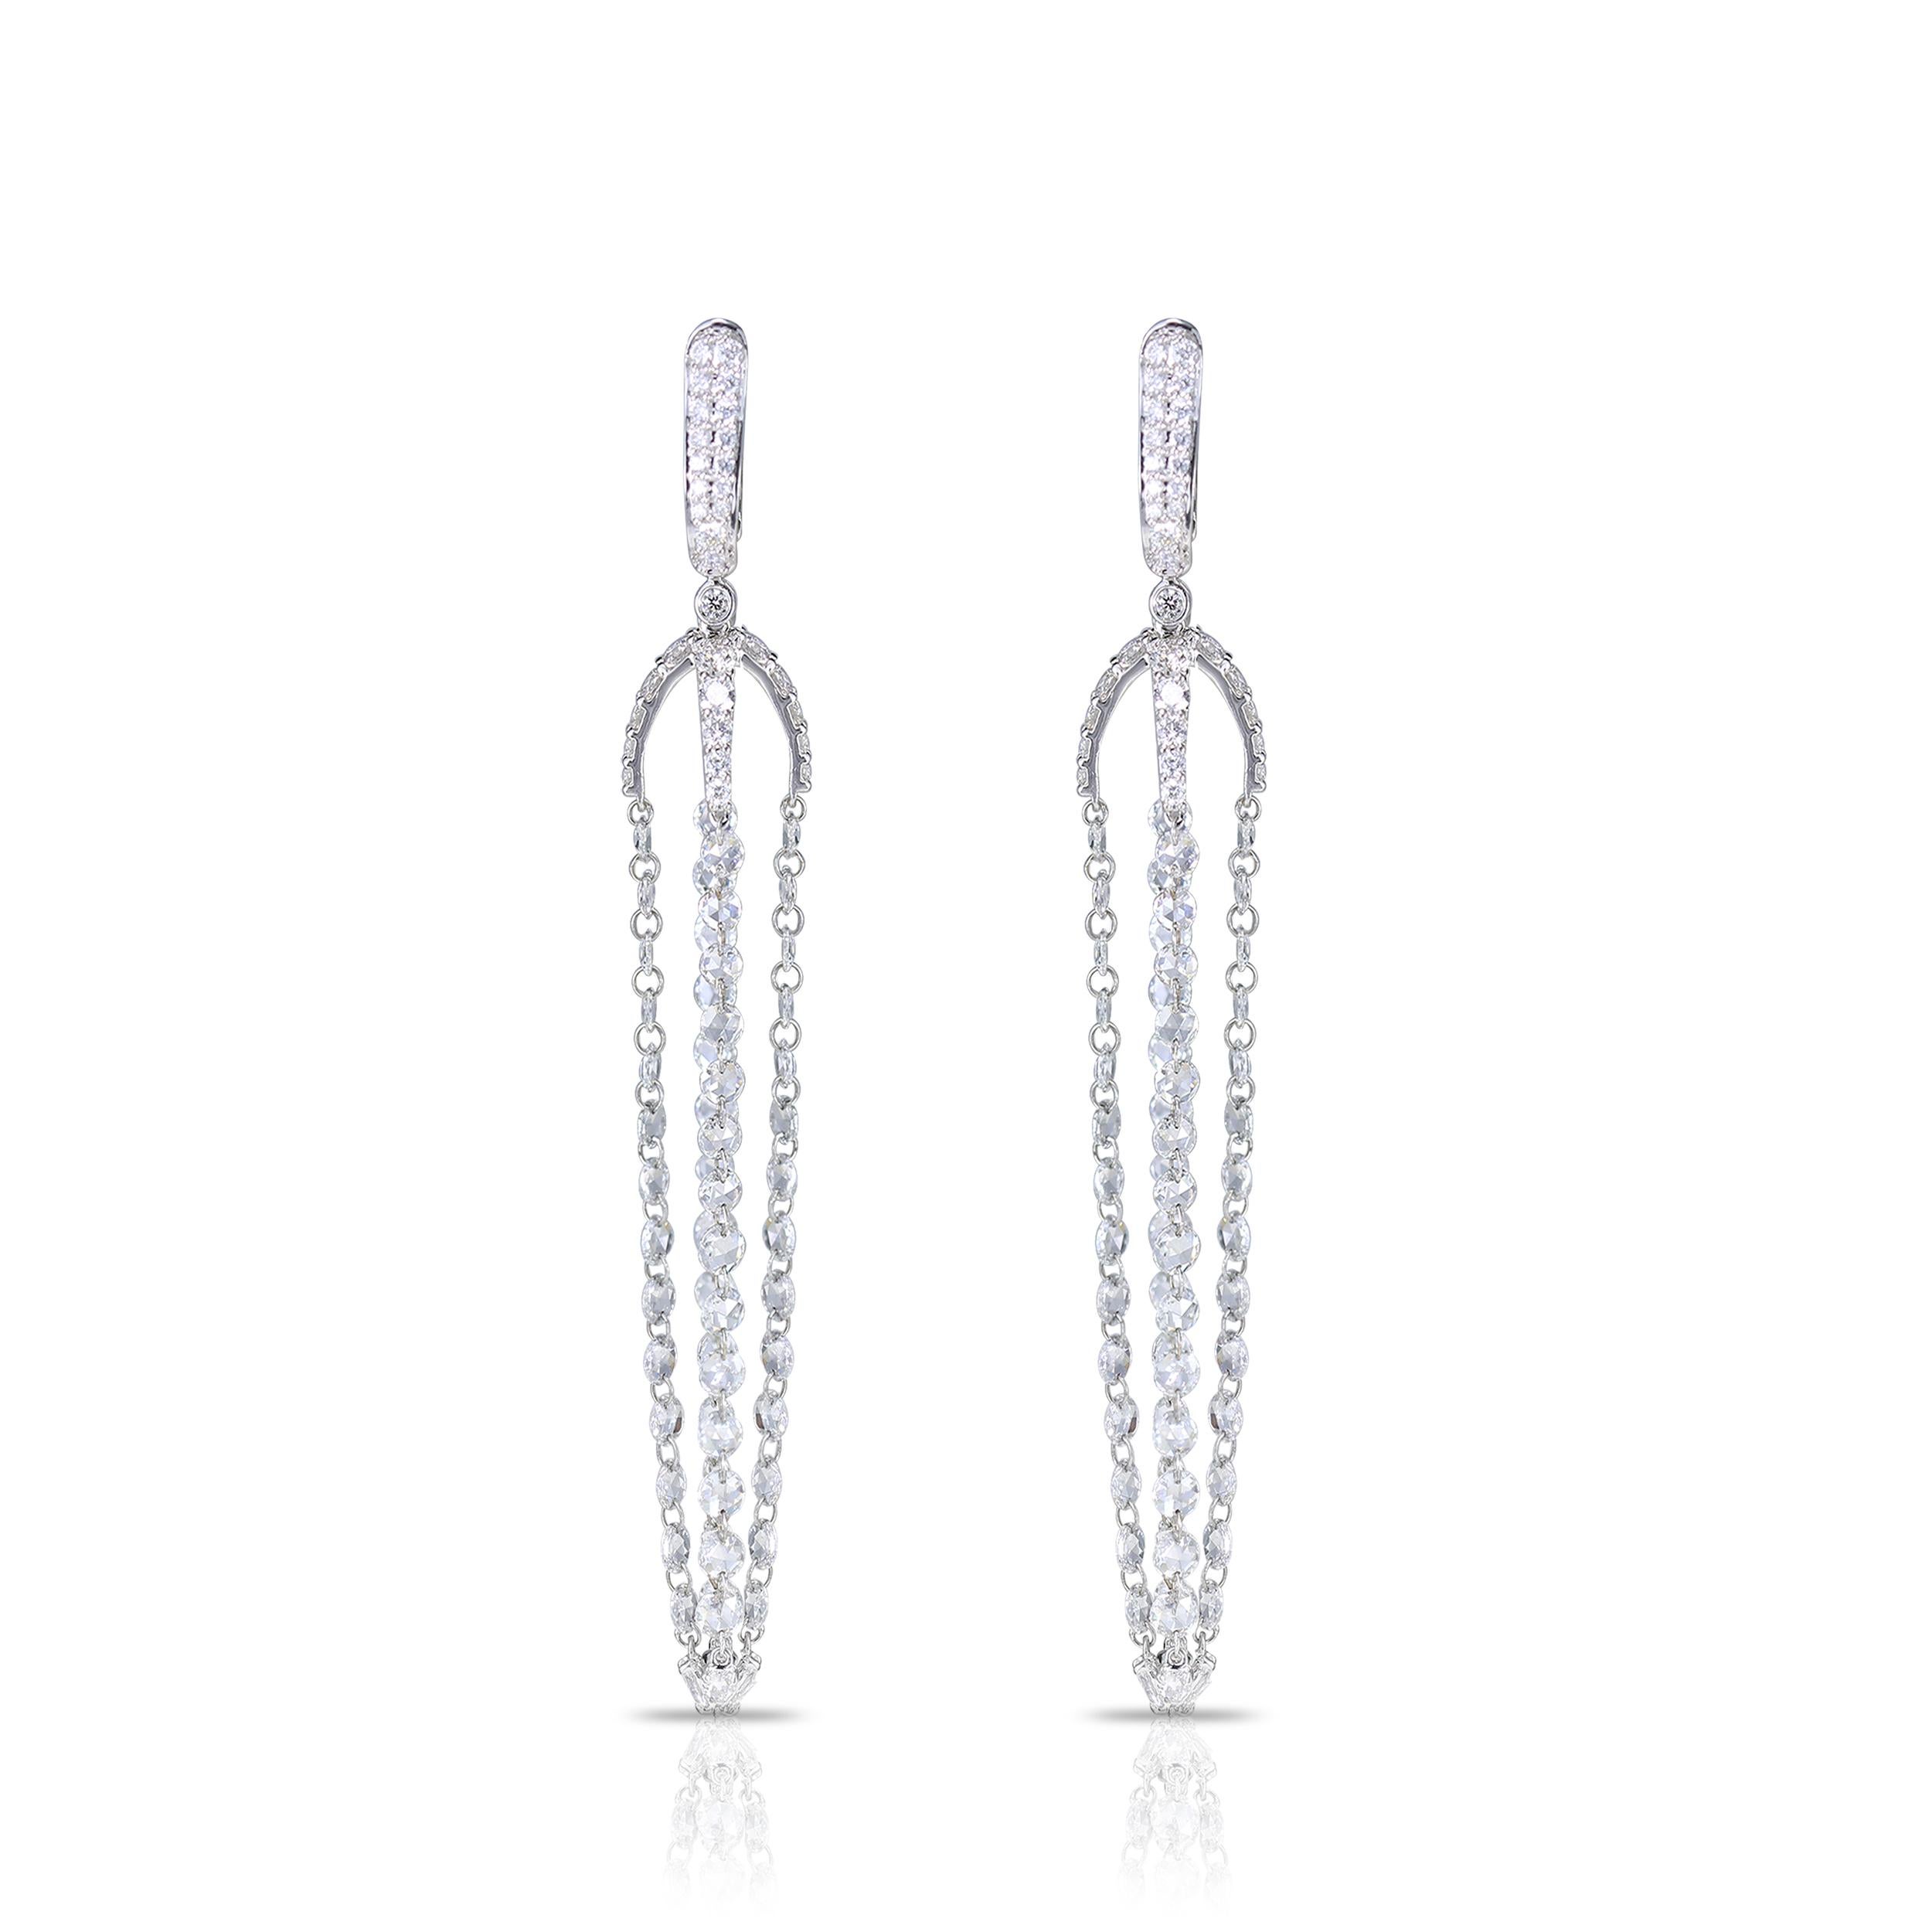 18K white gold and diamond earrings

Giving your selection of jewellery a modern update is this exquisite pair of 18K white gold earrings carefully studded with rose cut and brilliant cut diamonds in a drill and pave setting. Featuring 194 stones,